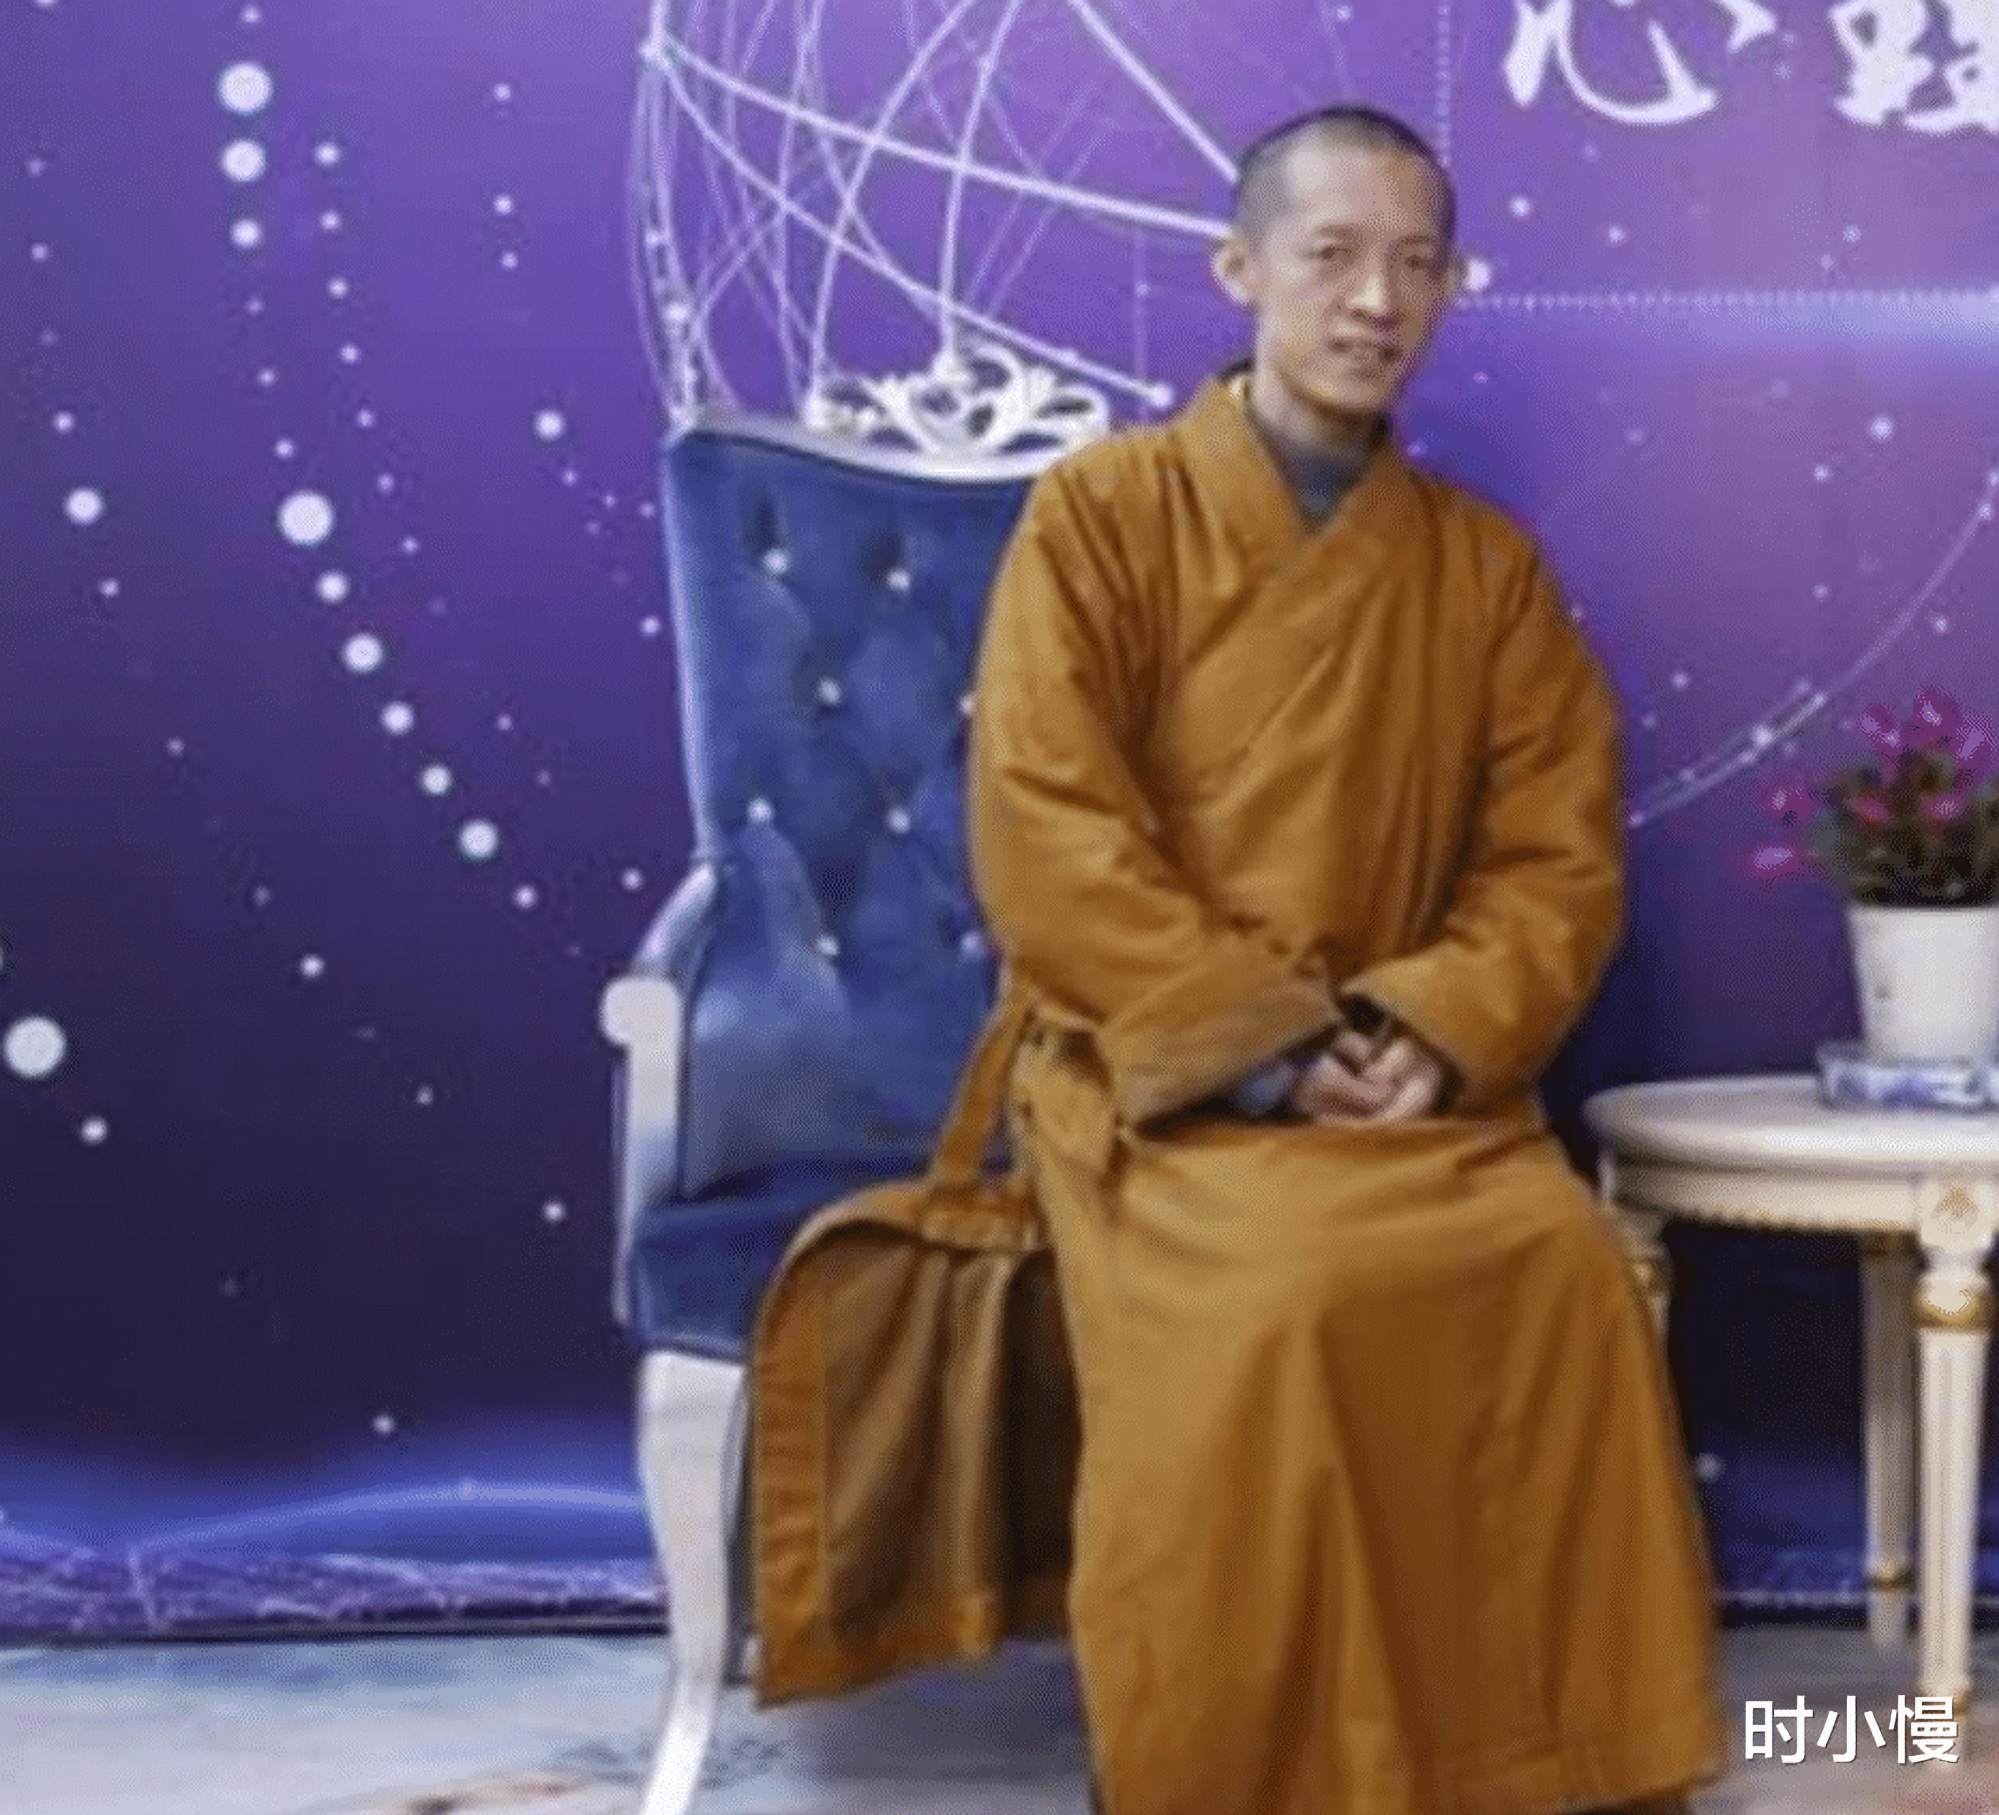 Liu pictured during his time as a Buddhist monk. He now says he is more suited to a “down-to-earth” life. Photo: handout